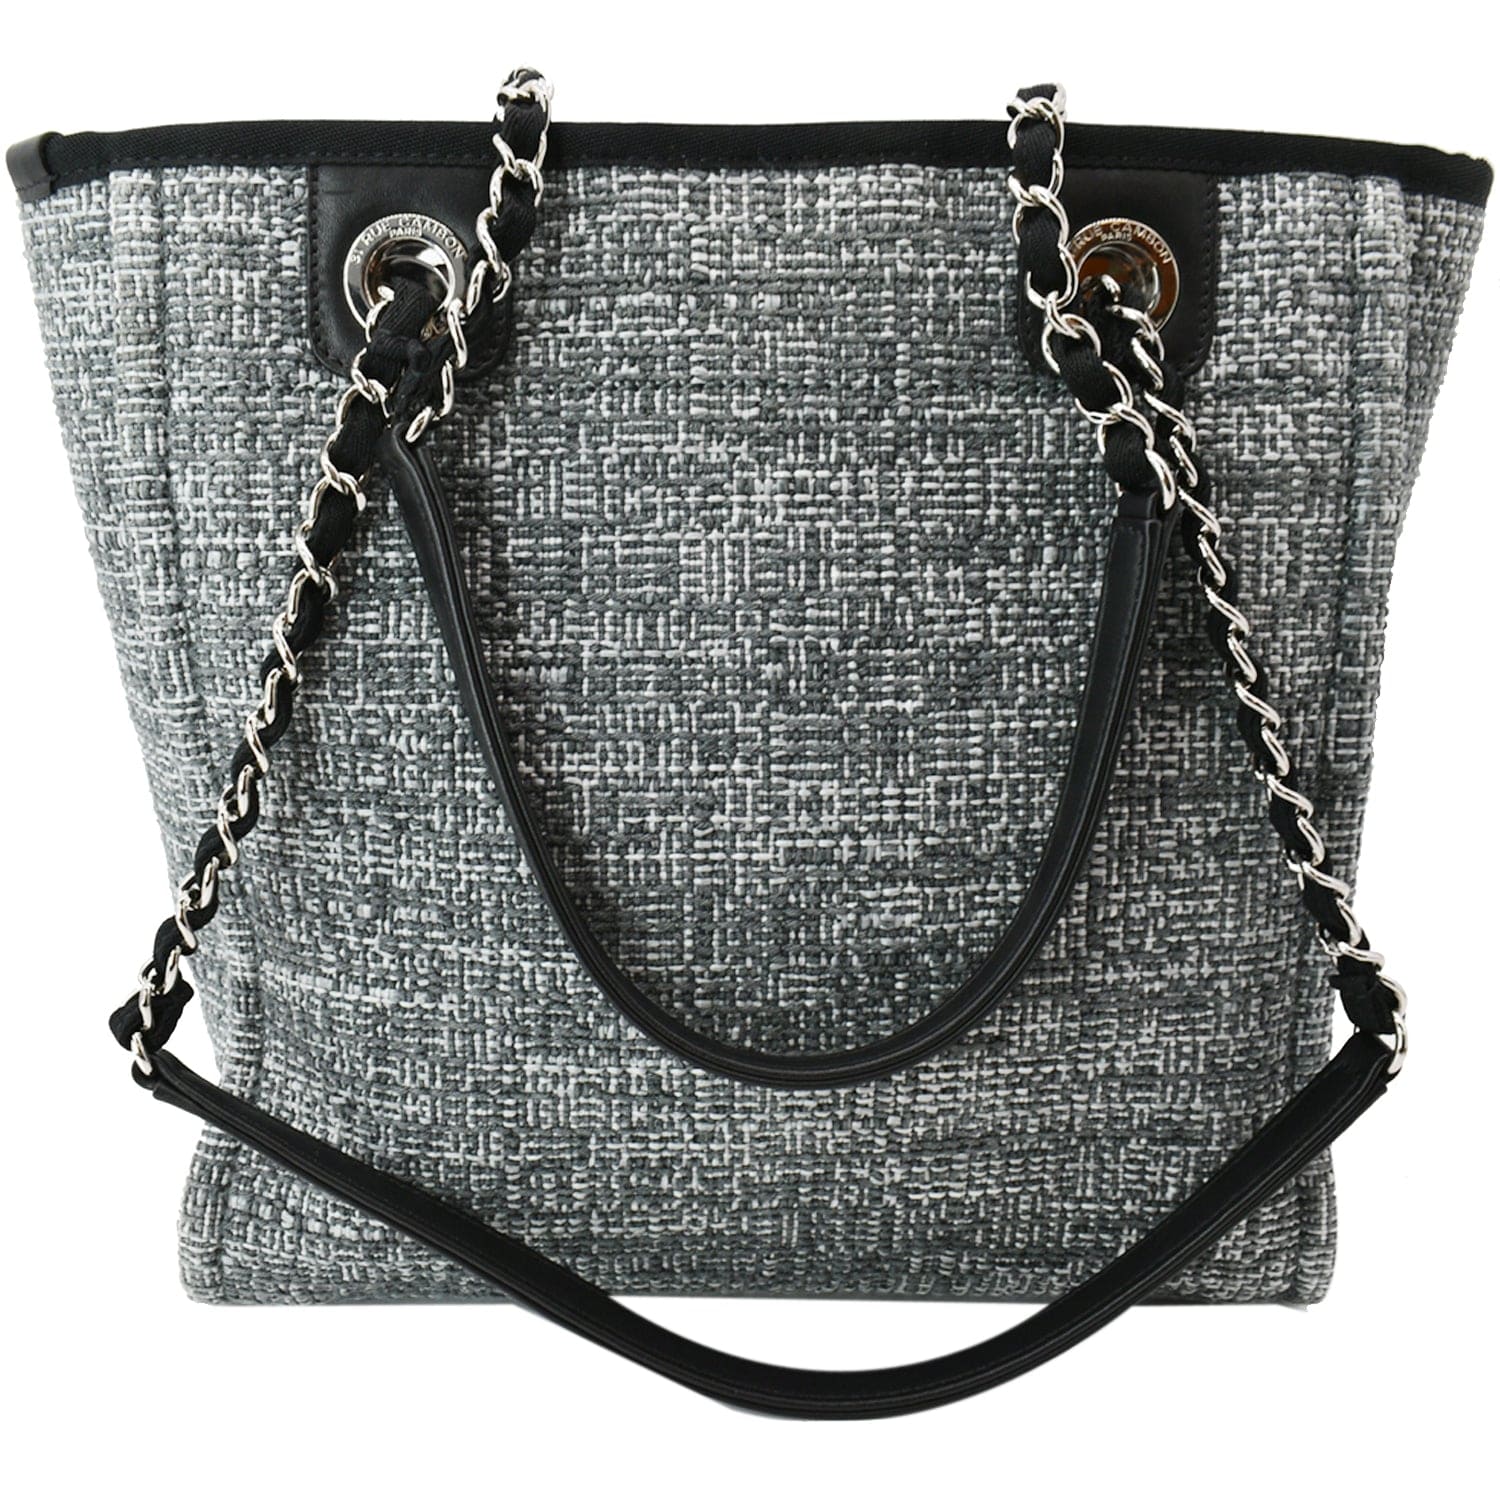 Deauville tote Chanel Grey in Cotton - 31794666